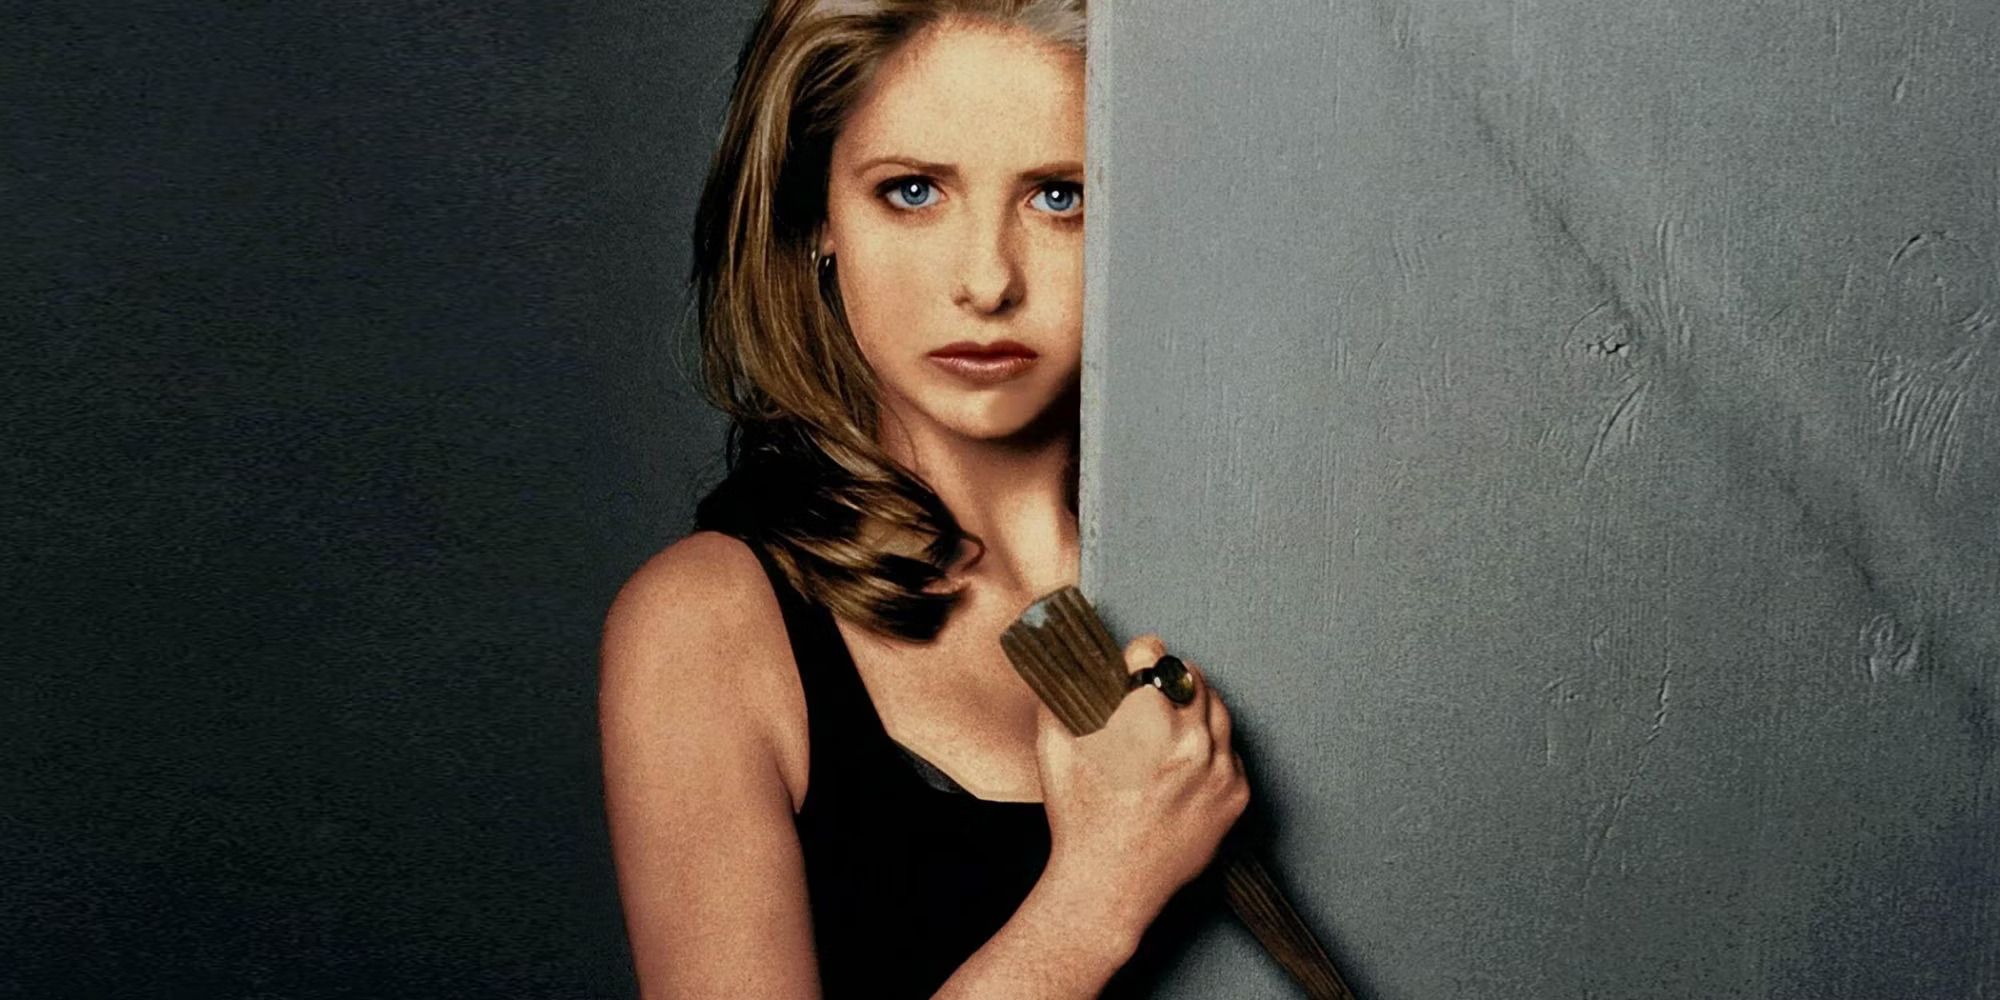 Buffy Summers holding a wooden stake in 'Buffy The Vampire Slayer'